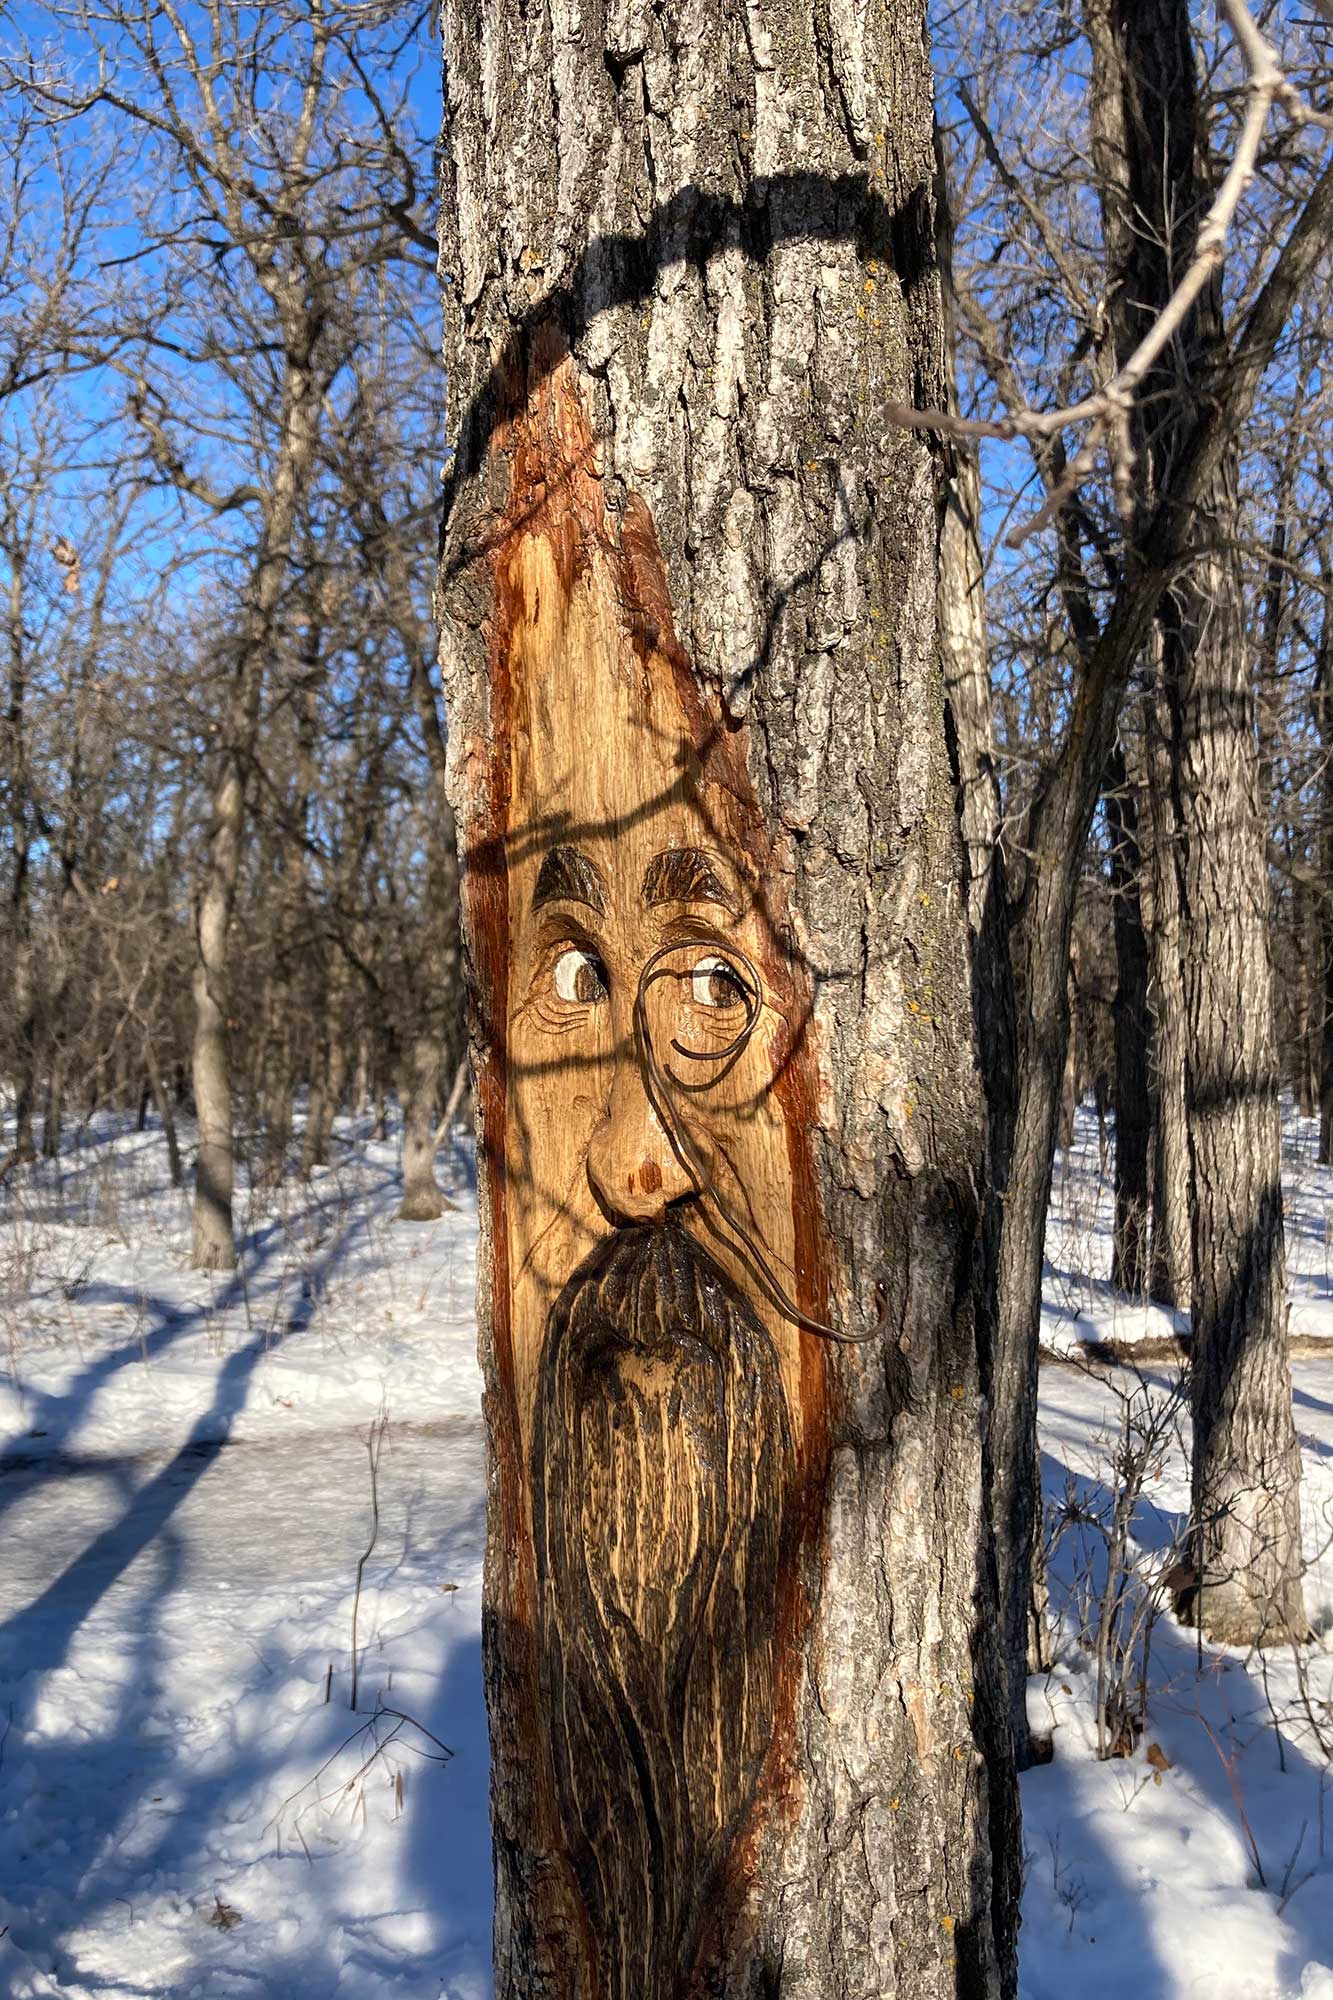 A tree carving at Bois-des-Esprits in Winnipeg.